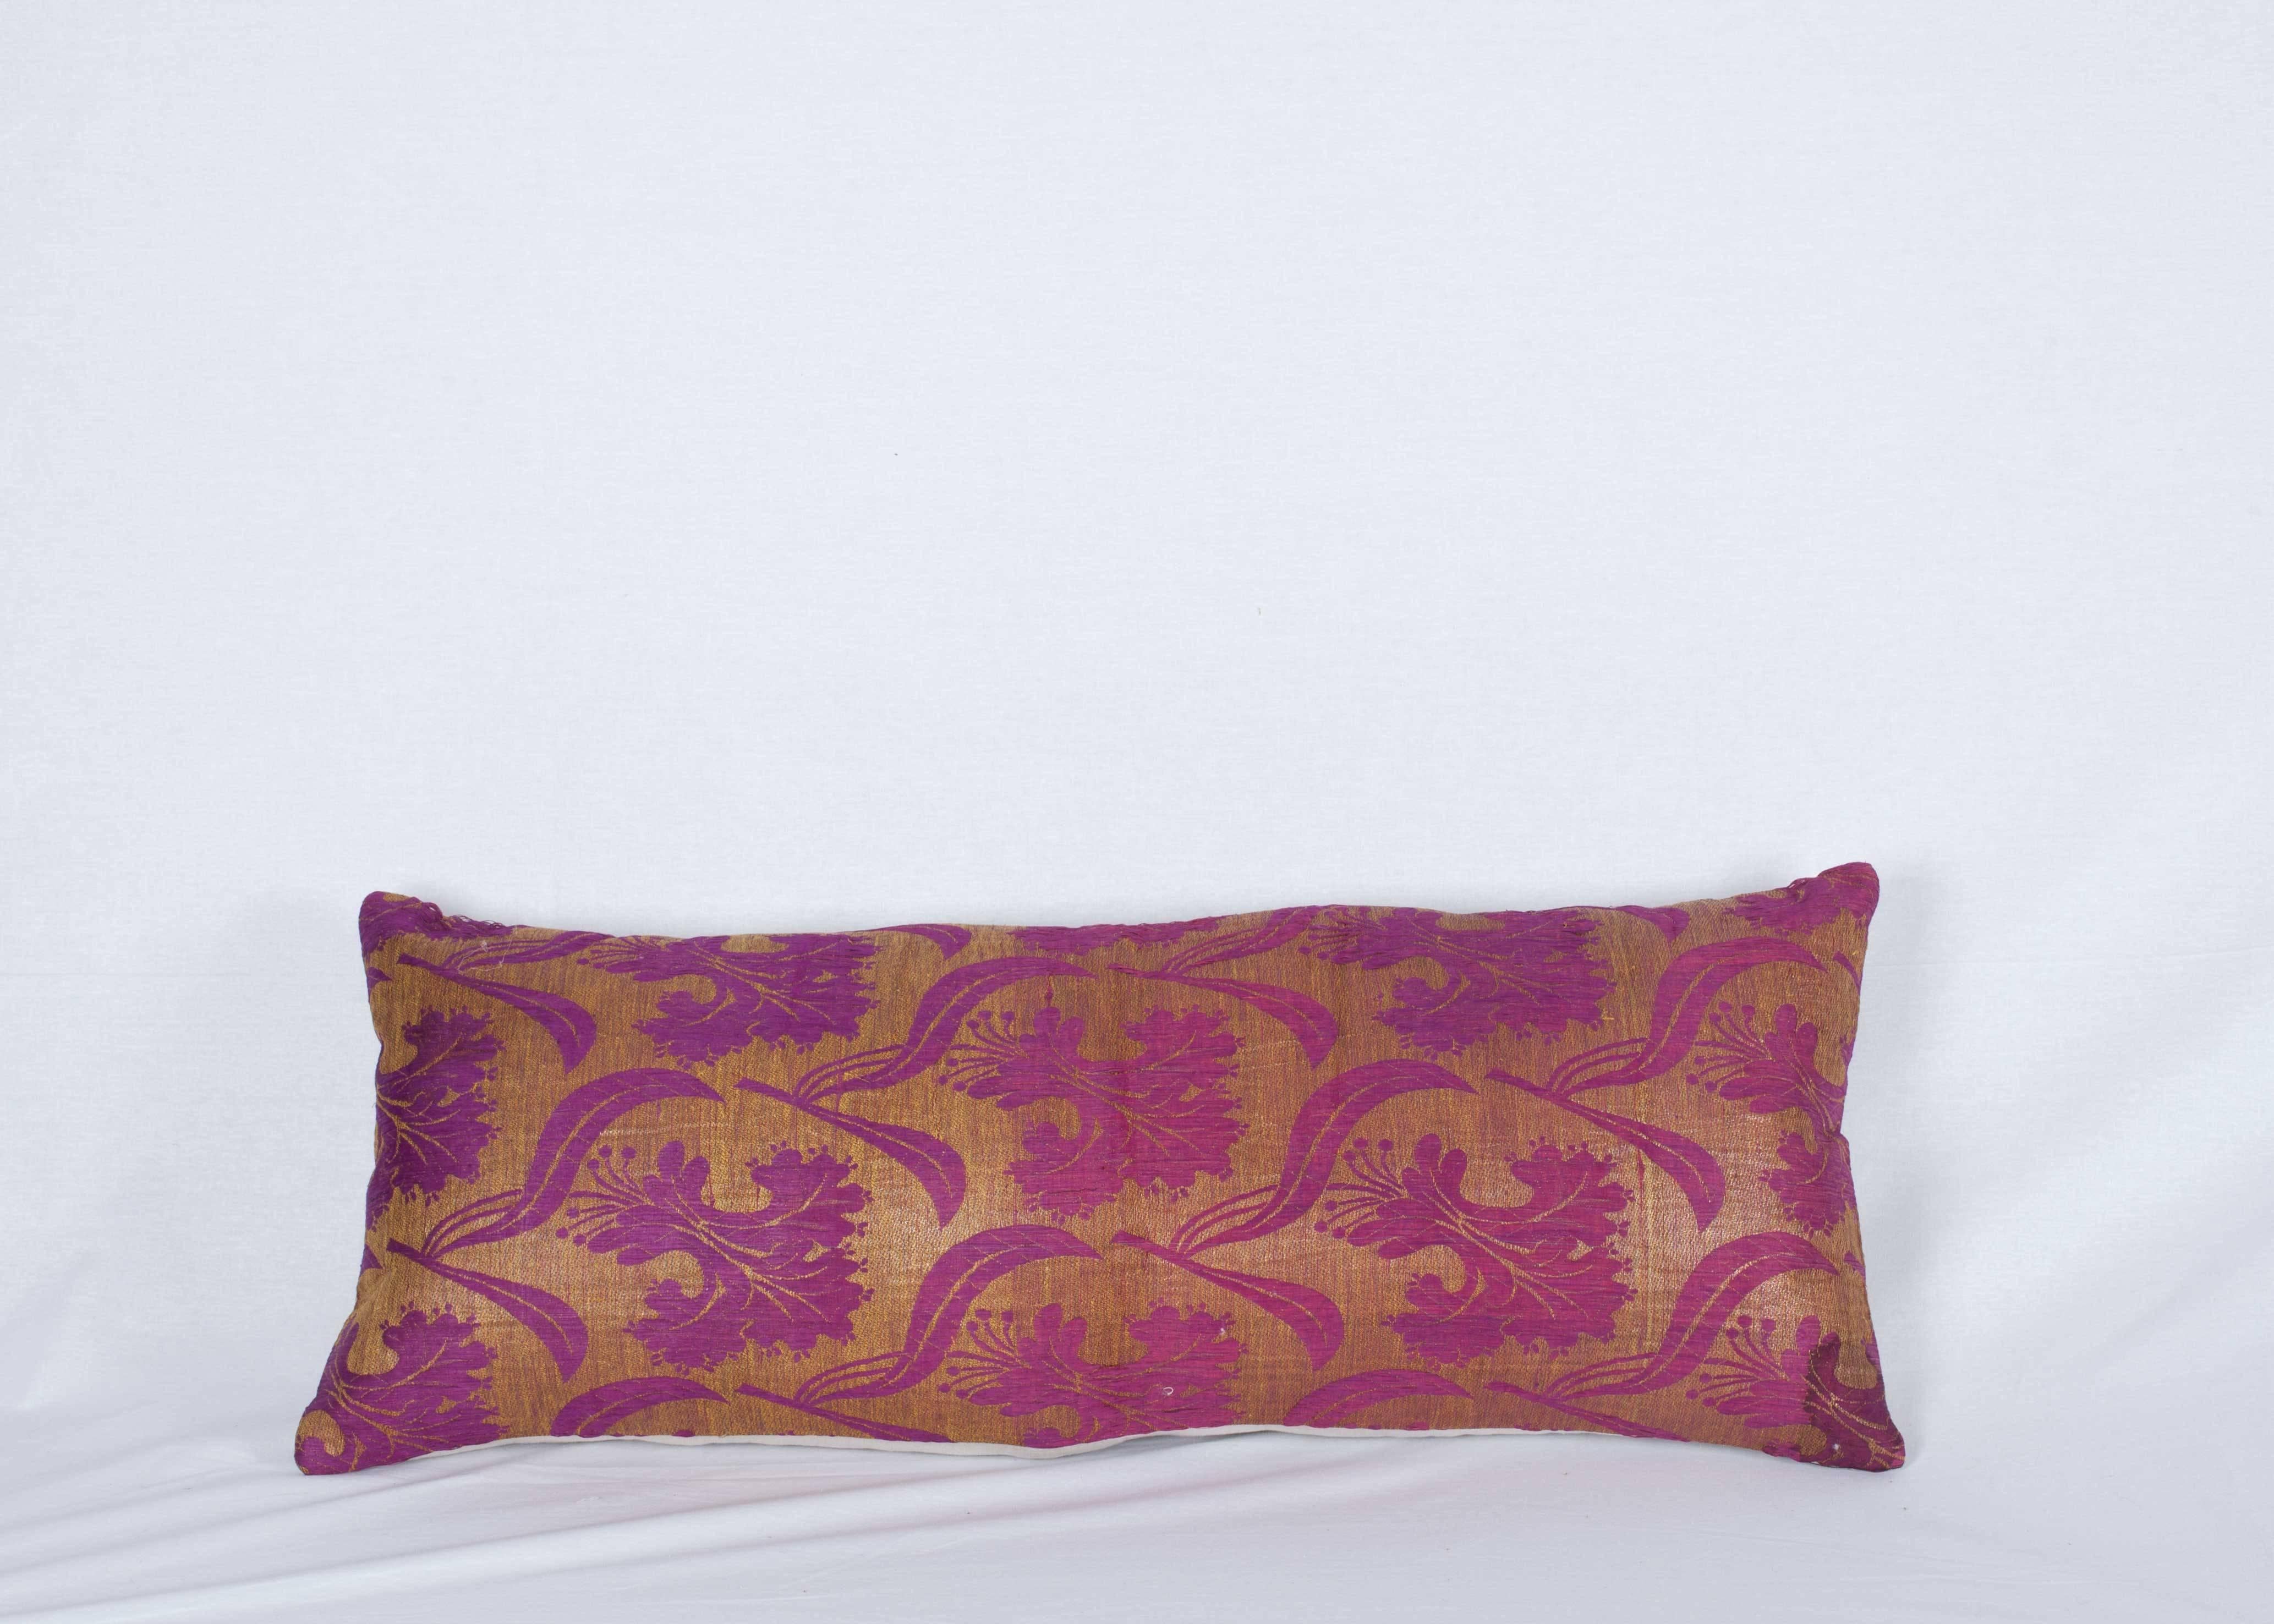 Islamic Pillow Made Out of a Late19th Century Ottoman Turkish Textile